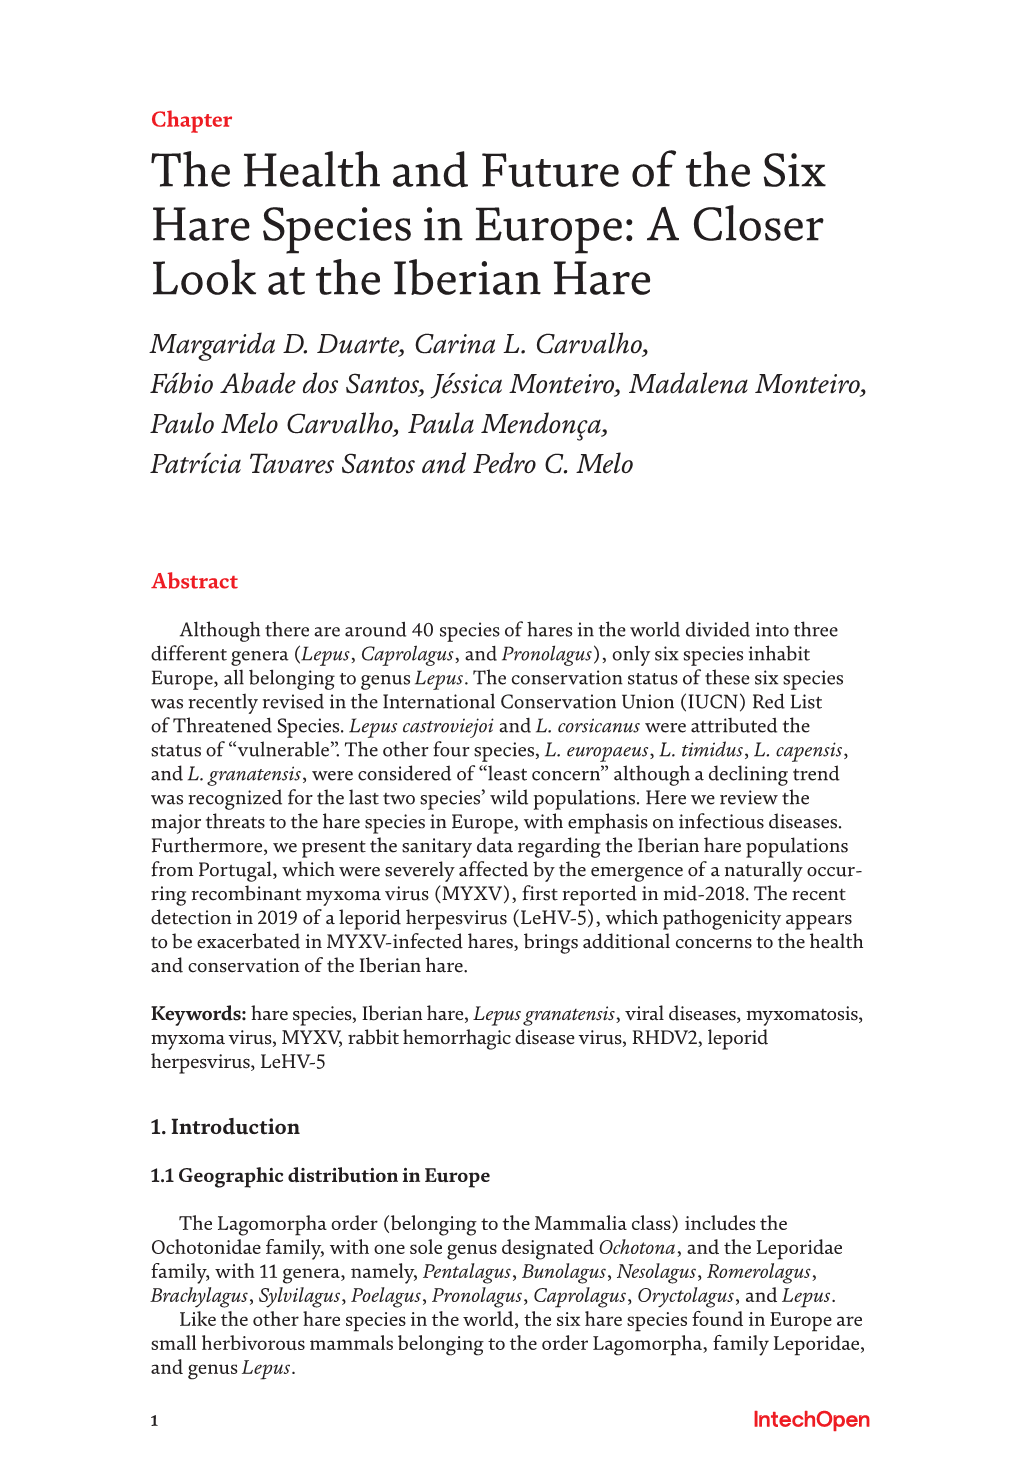 The Health and Future of the Six Hare Species in Europe: a Closer Look at the Iberian Hare Margarida D